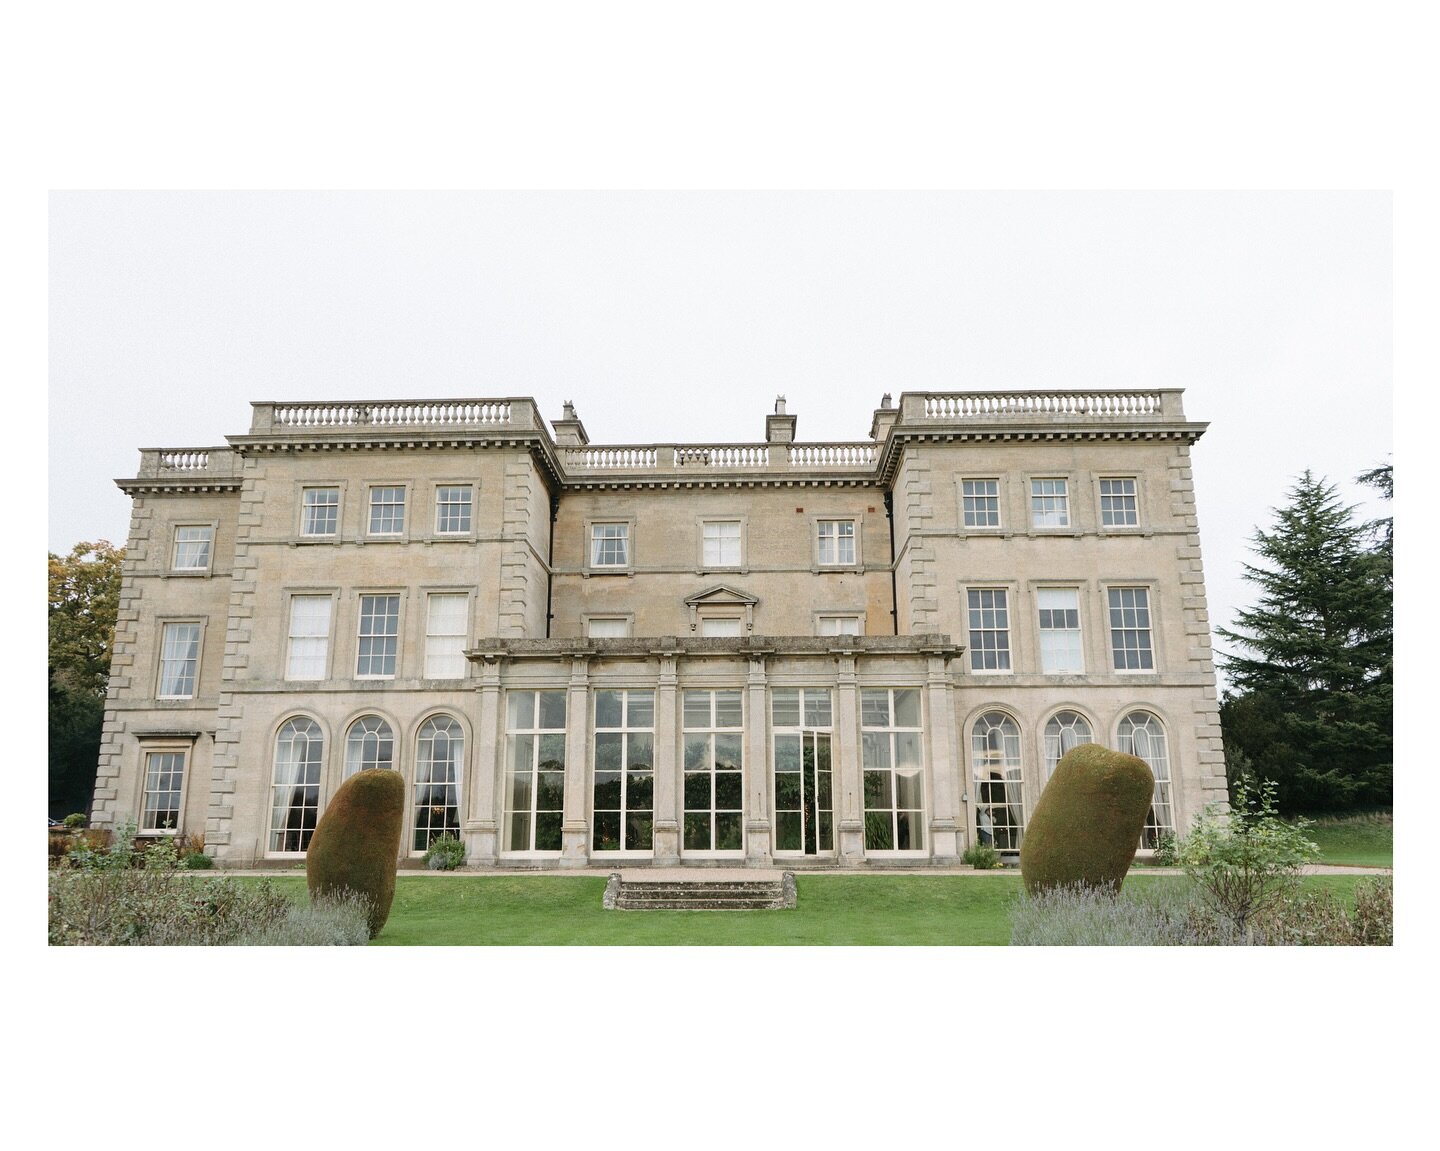 Prestwold Hall is just on our doorstep&hellip; And offers such a beautiful backdrop to your wedding. 

Workshop @eden.workshop
Planning + host @safrinasmithphotography
Venue @prestwoldhall
Stylist @thetwohummingbirds
Floral Design @aliciaflowerdesign